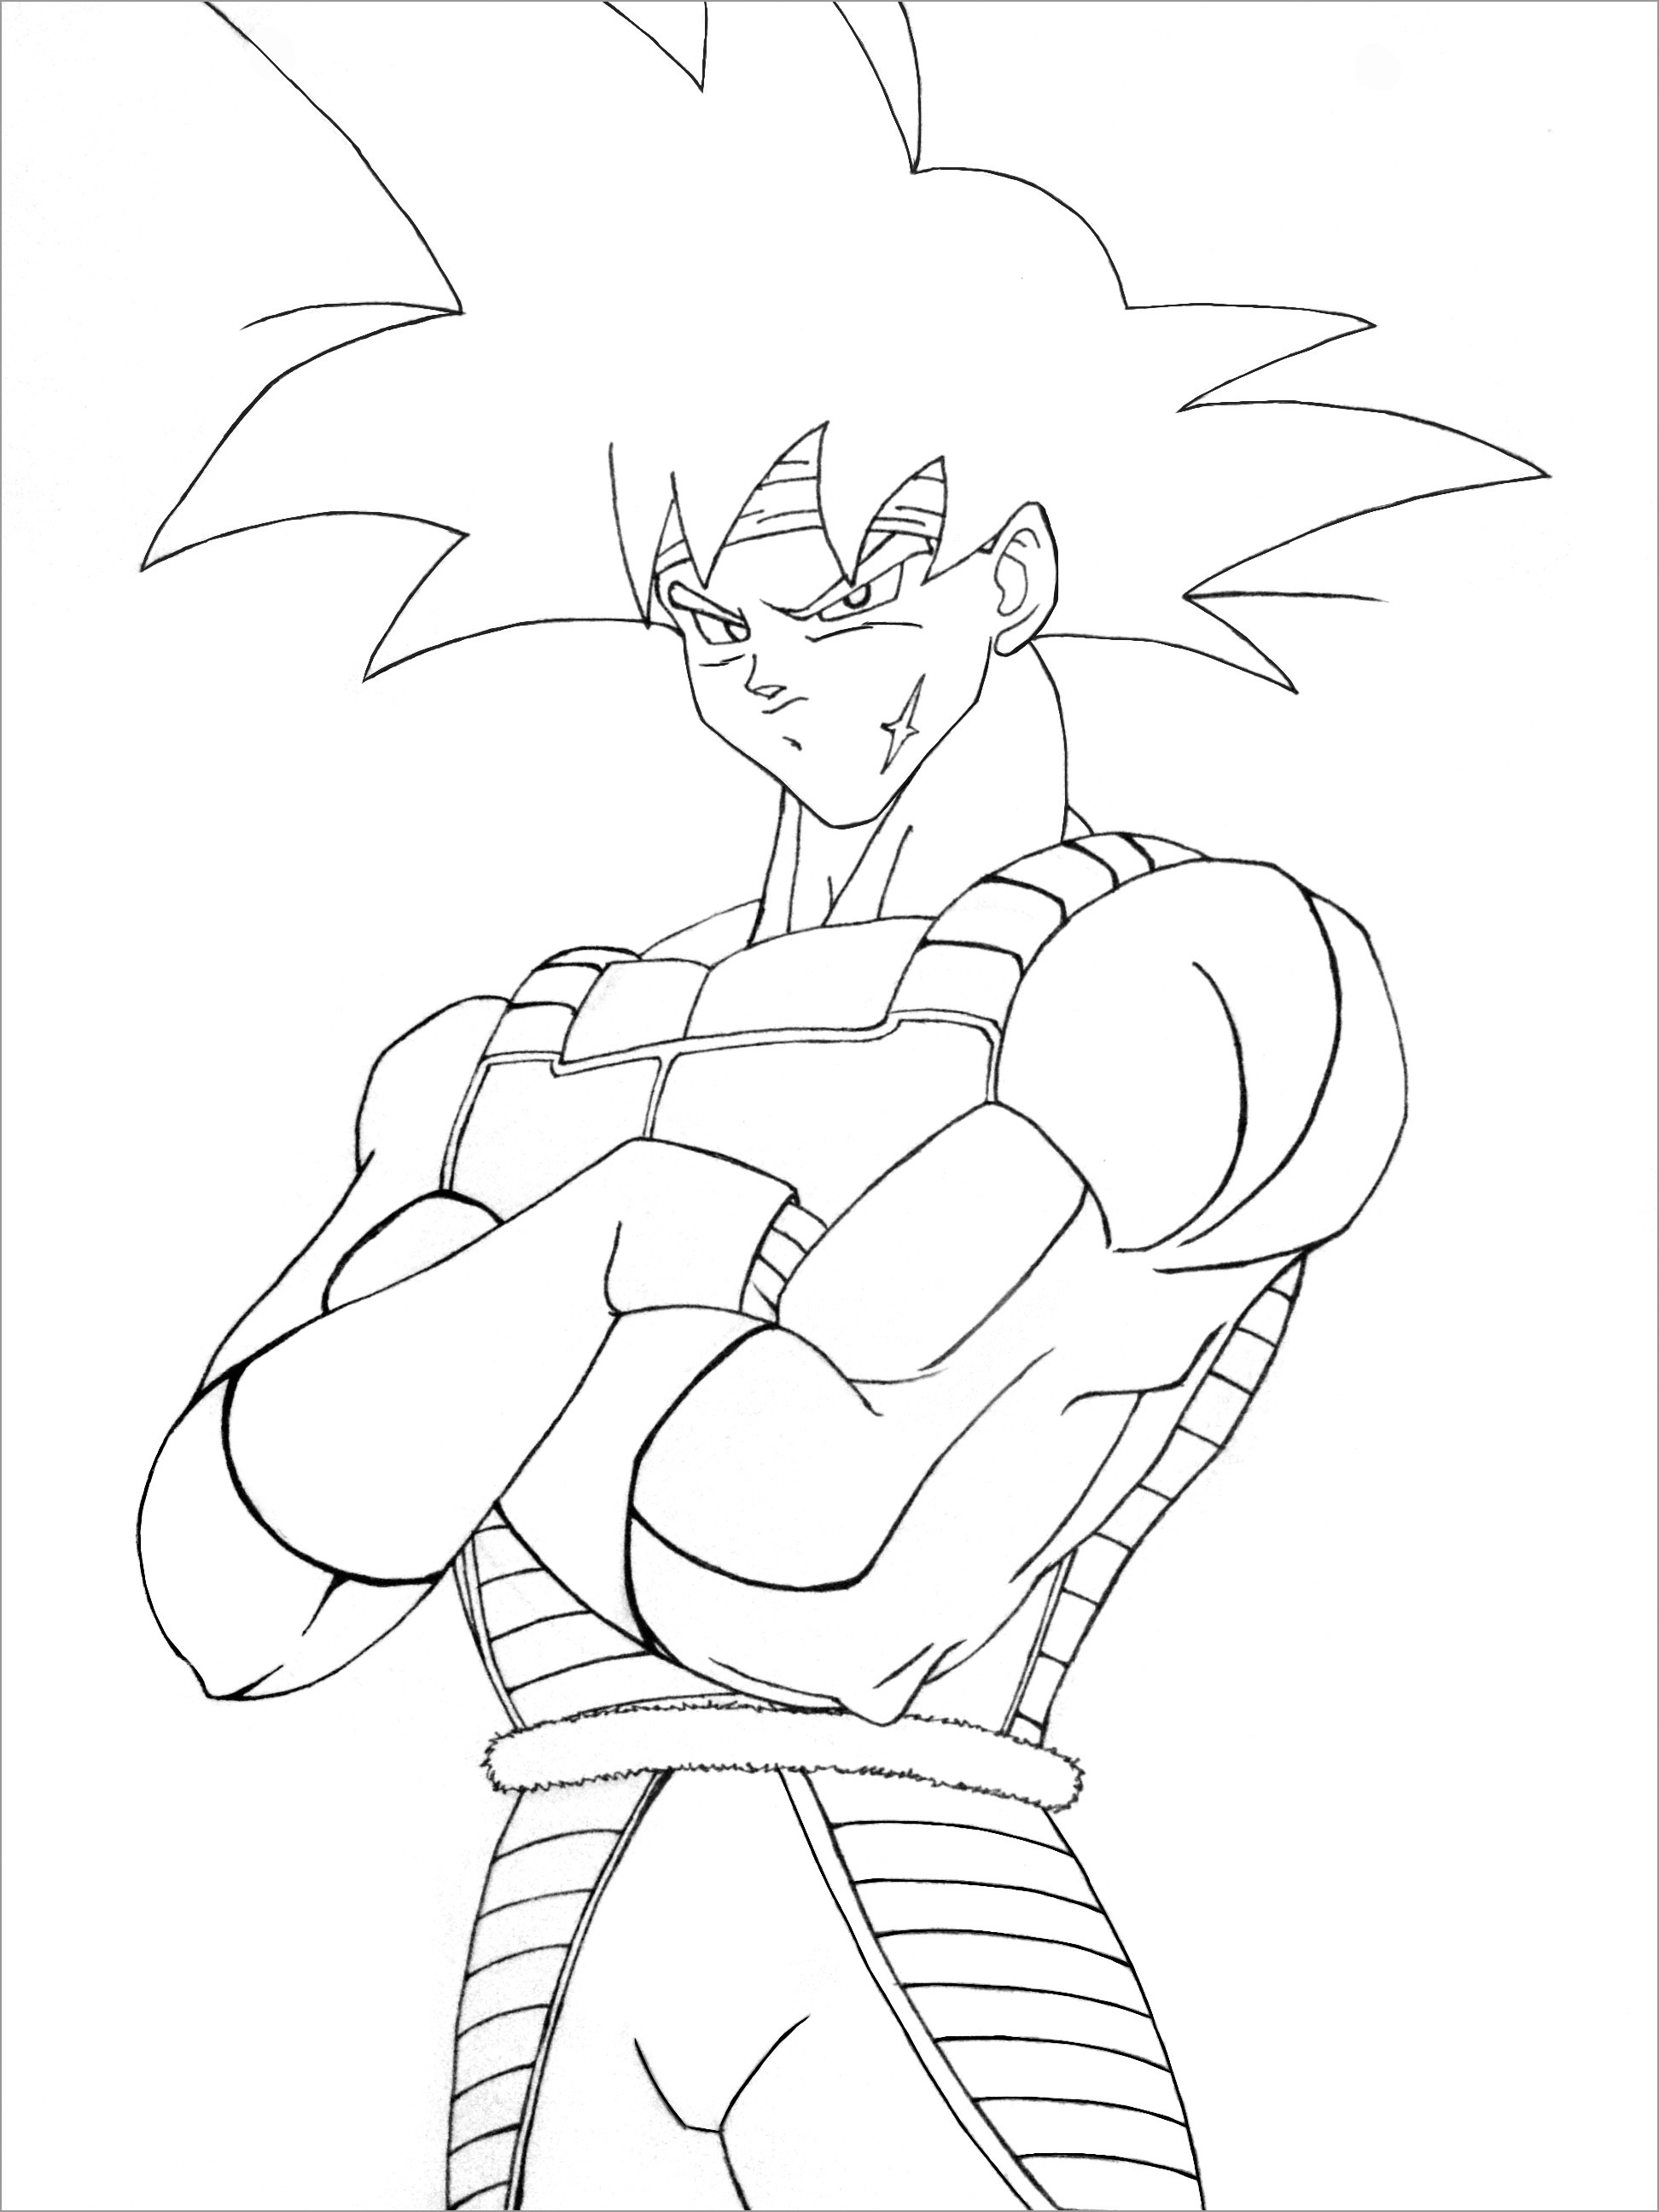 Dragon Ball Z Coloring Pages Bardock - the Father Of Goku